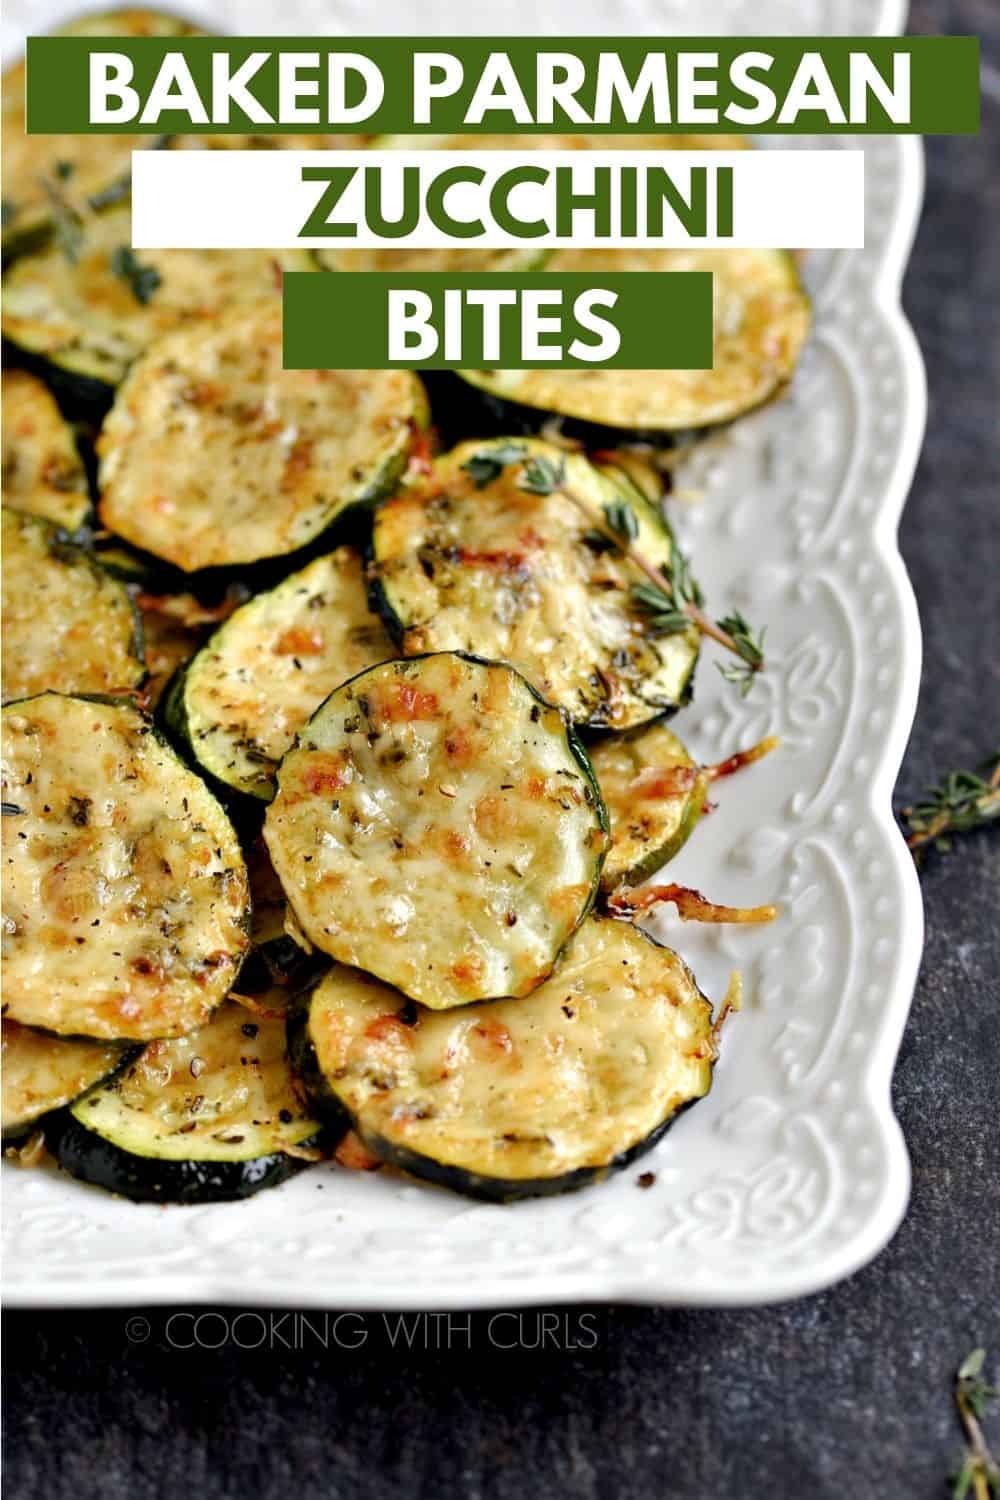 Baked Parmesan Zucchini Bites - Cooking with Curls